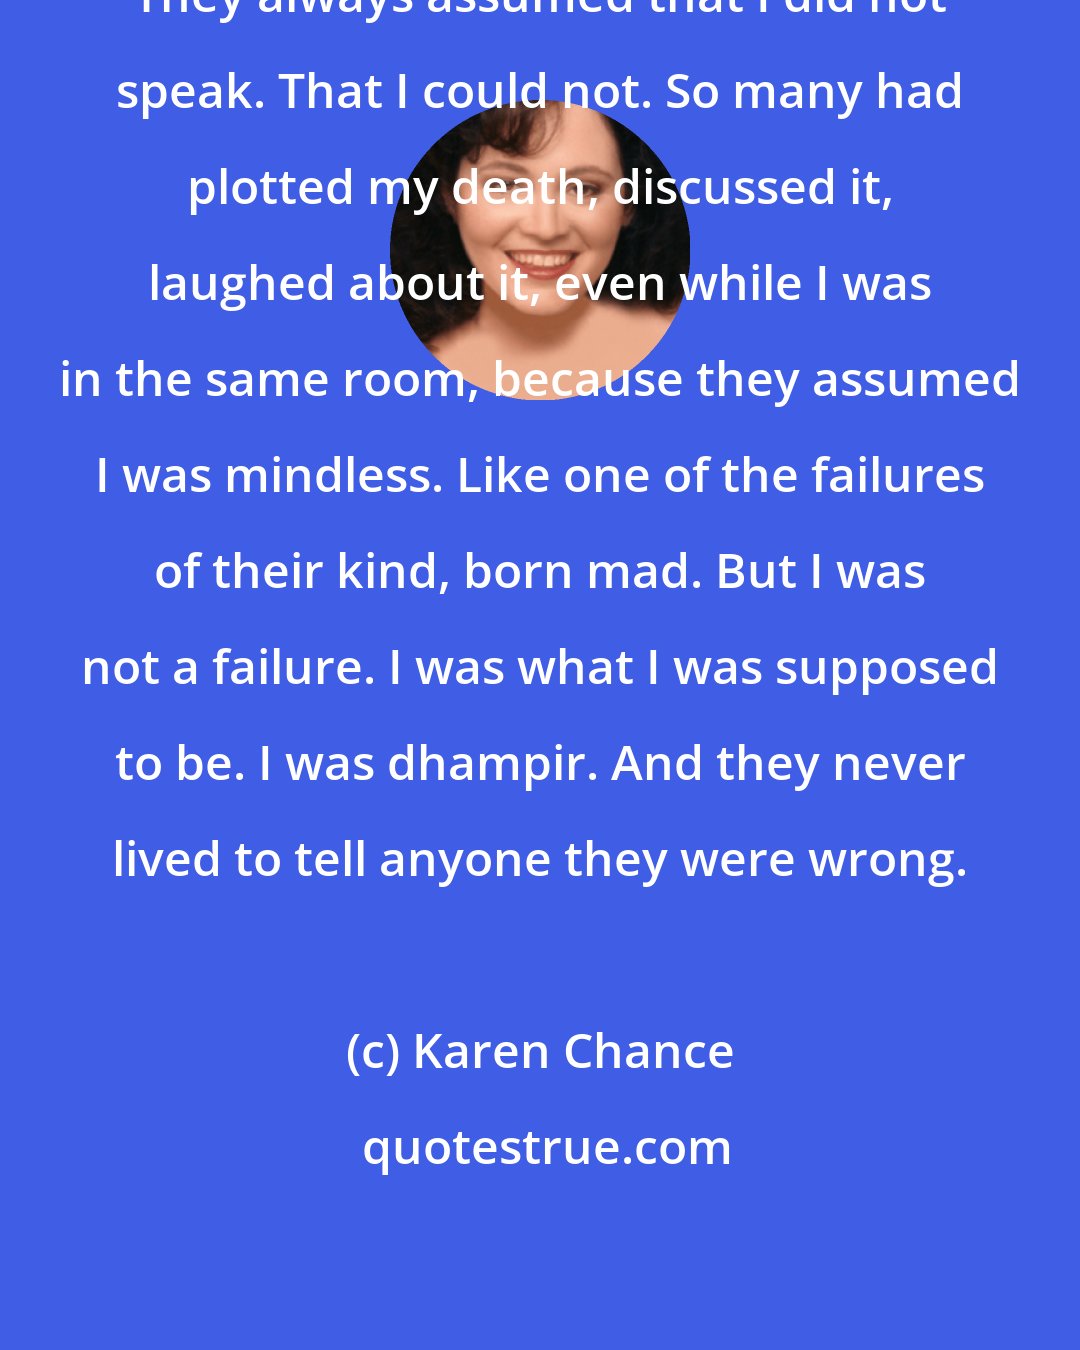 Karen Chance: They always assumed that I did not speak. That I could not. So many had plotted my death, discussed it, laughed about it, even while I was in the same room, because they assumed I was mindless. Like one of the failures of their kind, born mad. But I was not a failure. I was what I was supposed to be. I was dhampir. And they never lived to tell anyone they were wrong.